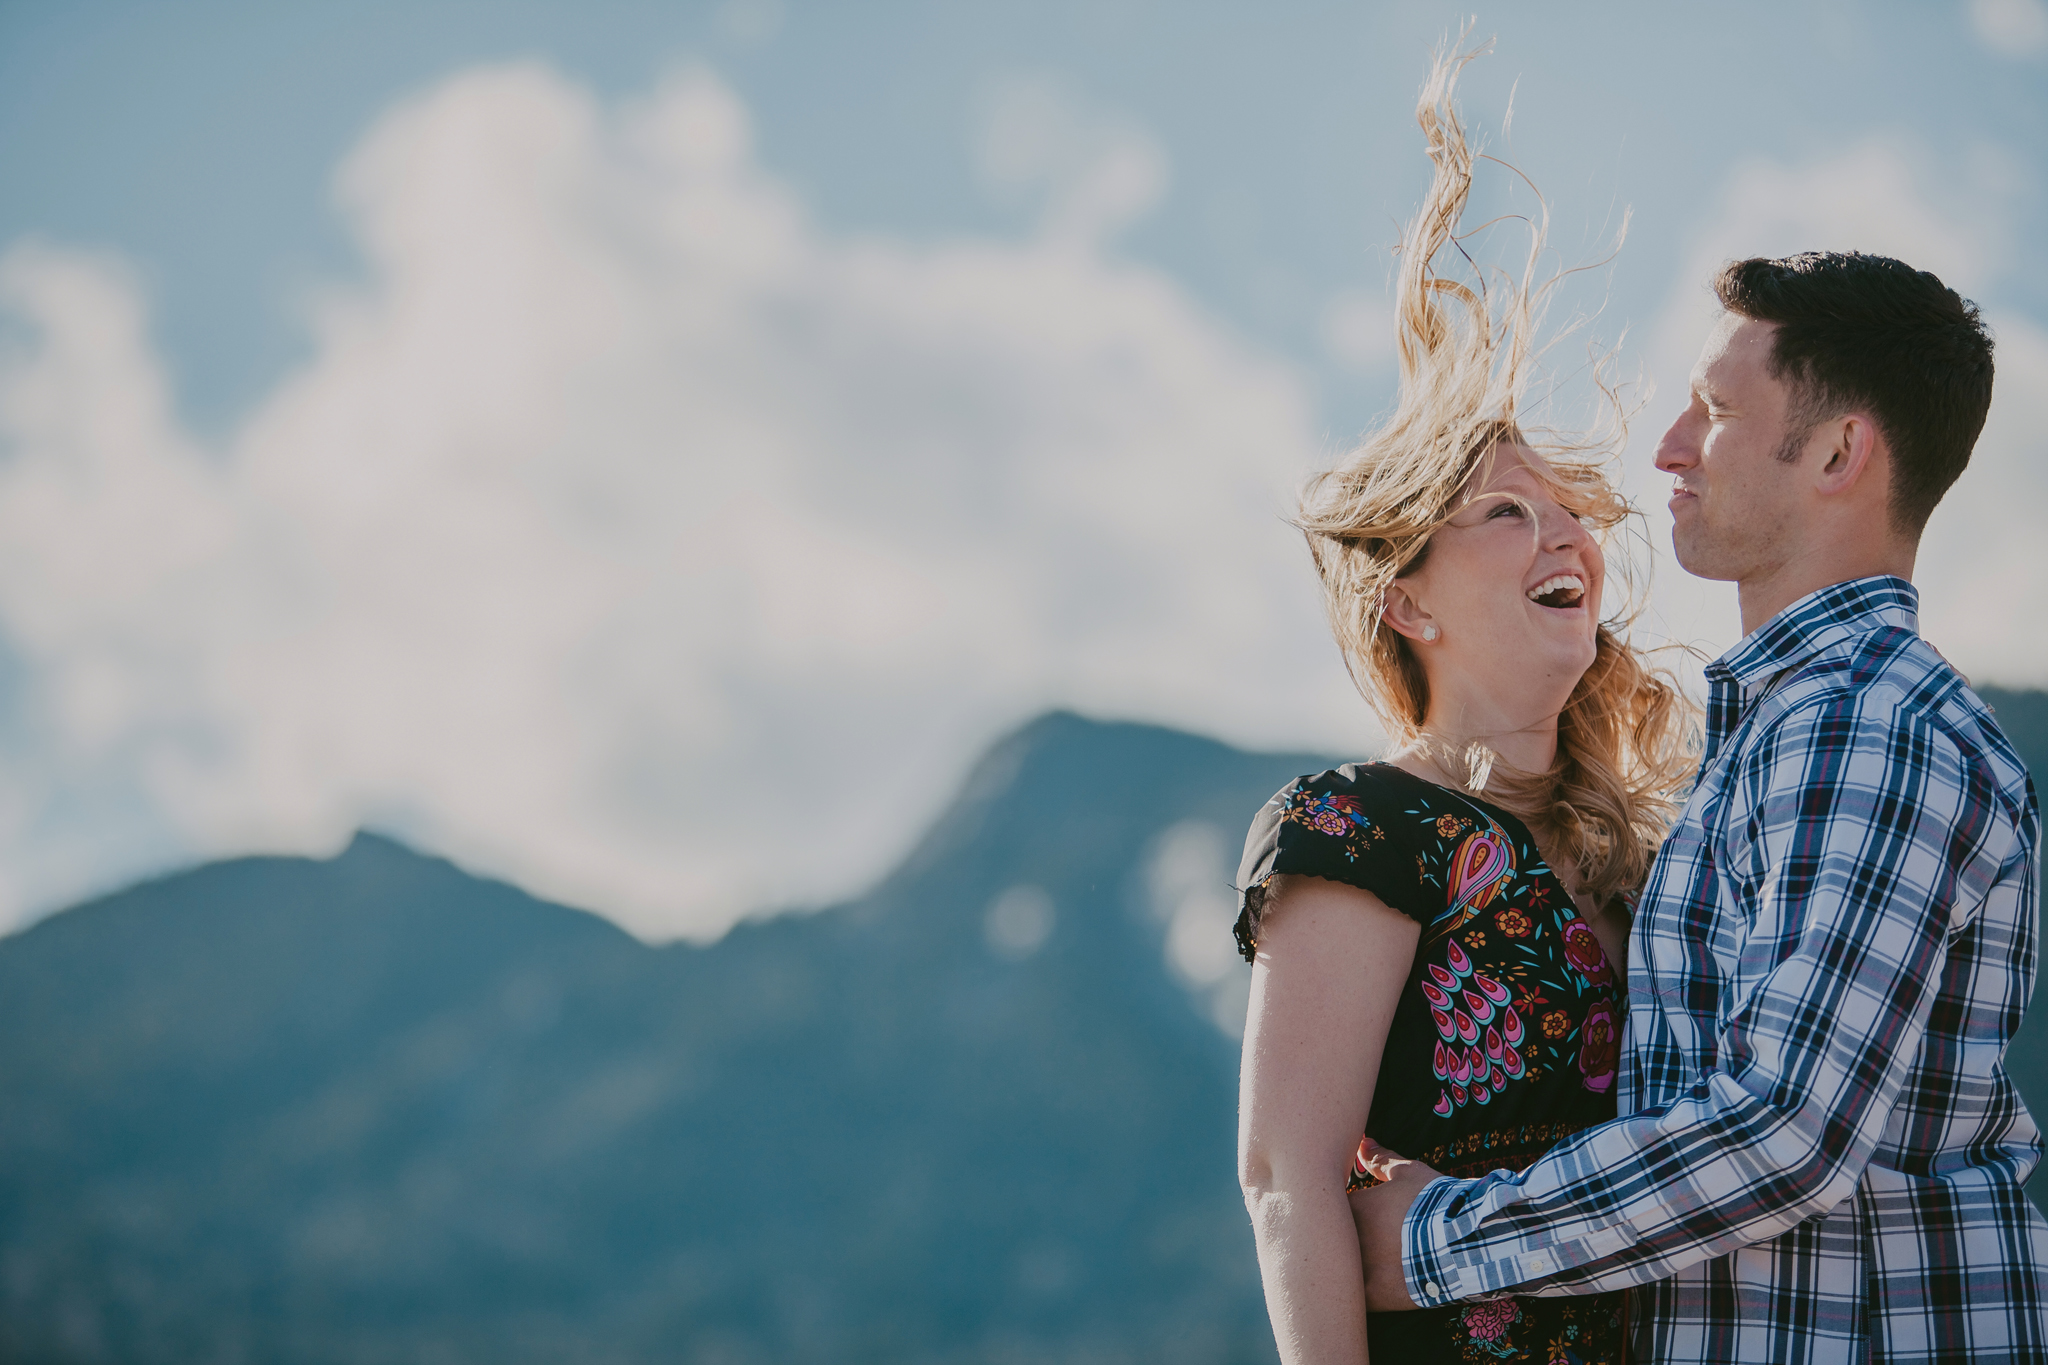 A silly moment in the mountains of NC during Mallory & Peter's engagment session. Photography by Mabyn Ludke.